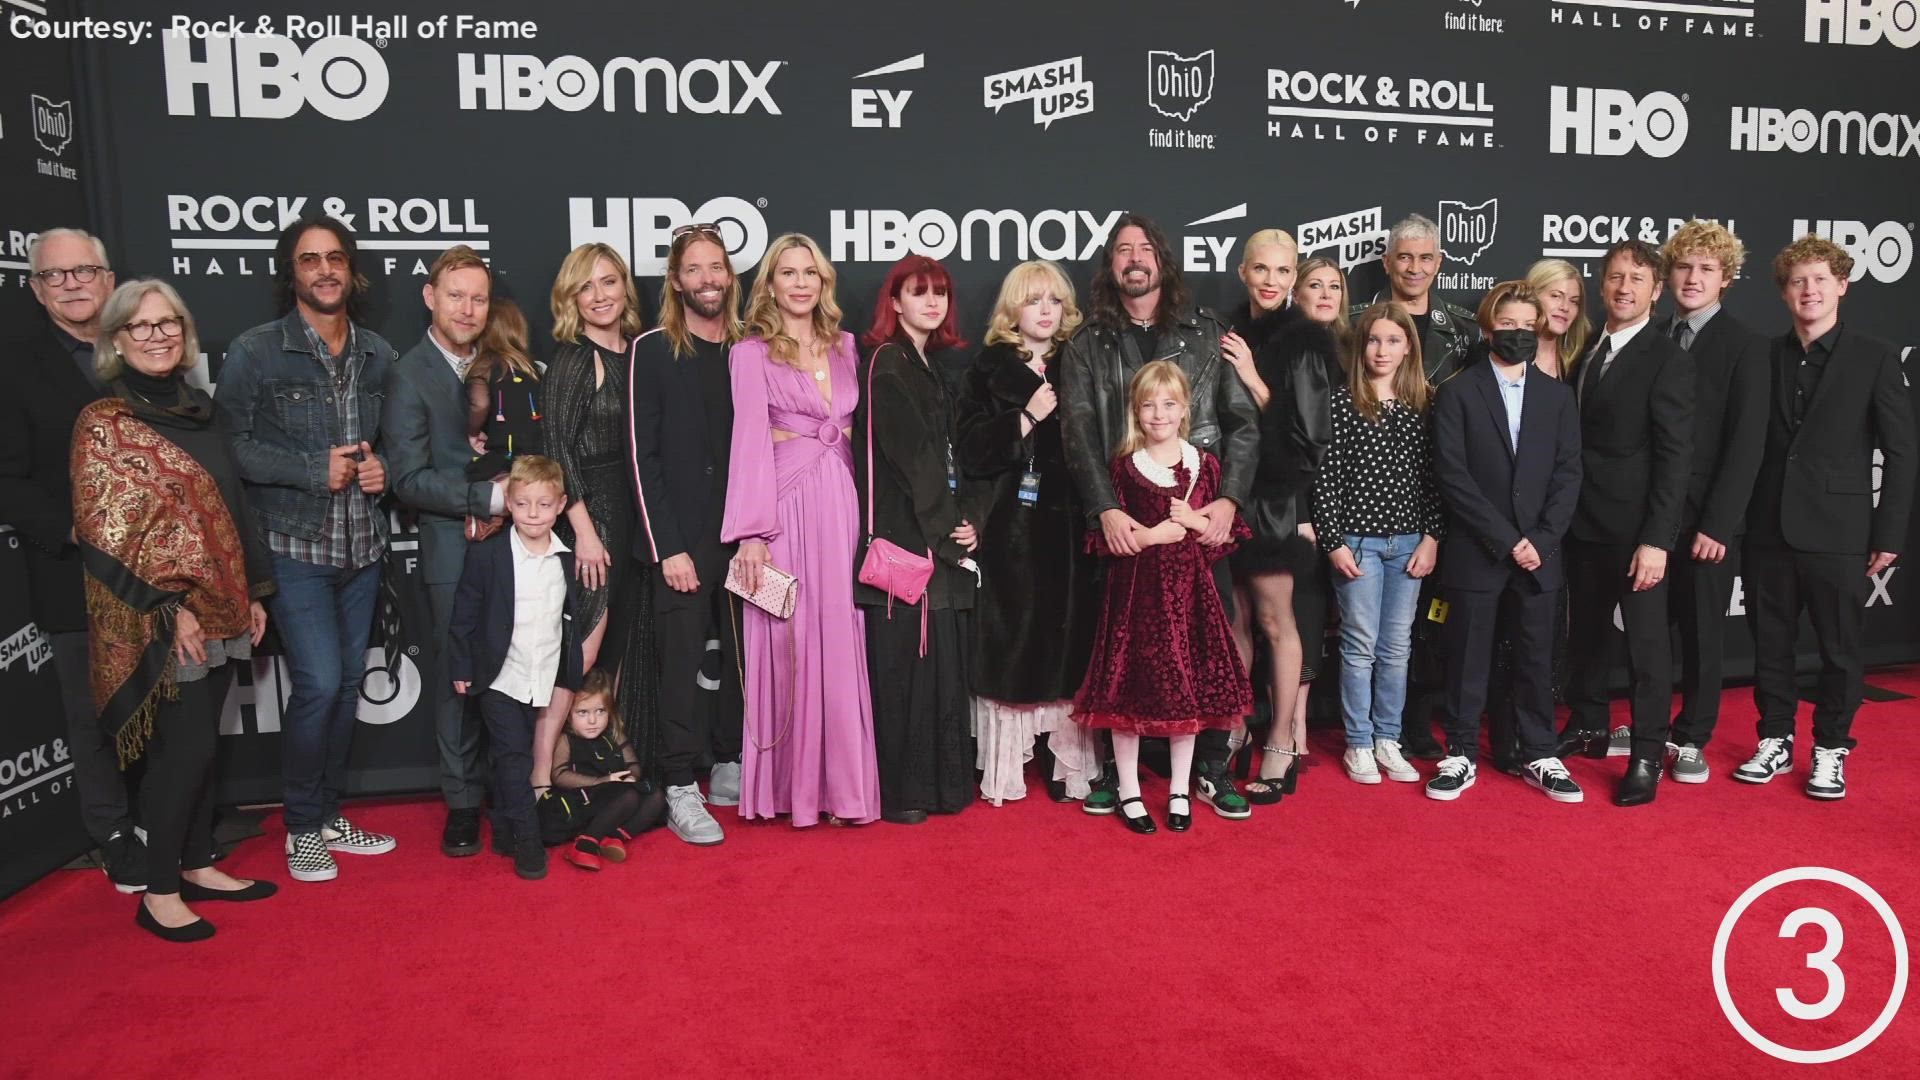 Rock 'n' roll royalty has descended upon Cleveland tonight for the 2021 Rock & Roll Hall of Fame induction ceremony at Rocket Mortgage FieldHouse.